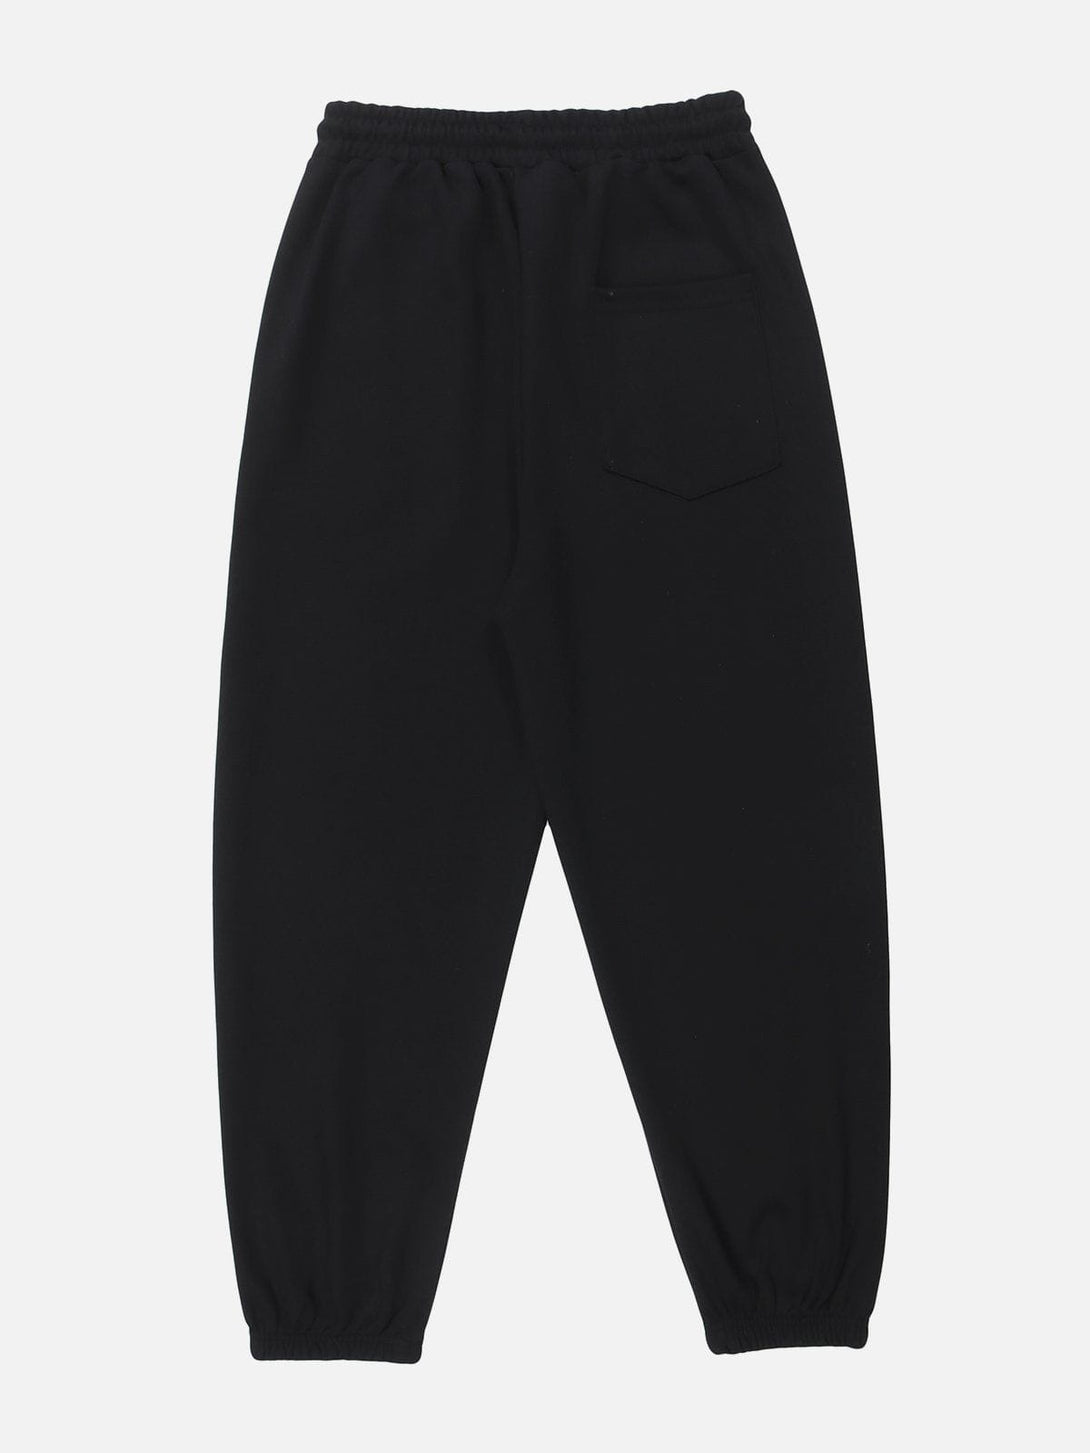 Levefly - Solid Color Beach Print Sweatpants - Streetwear Fashion - levefly.com